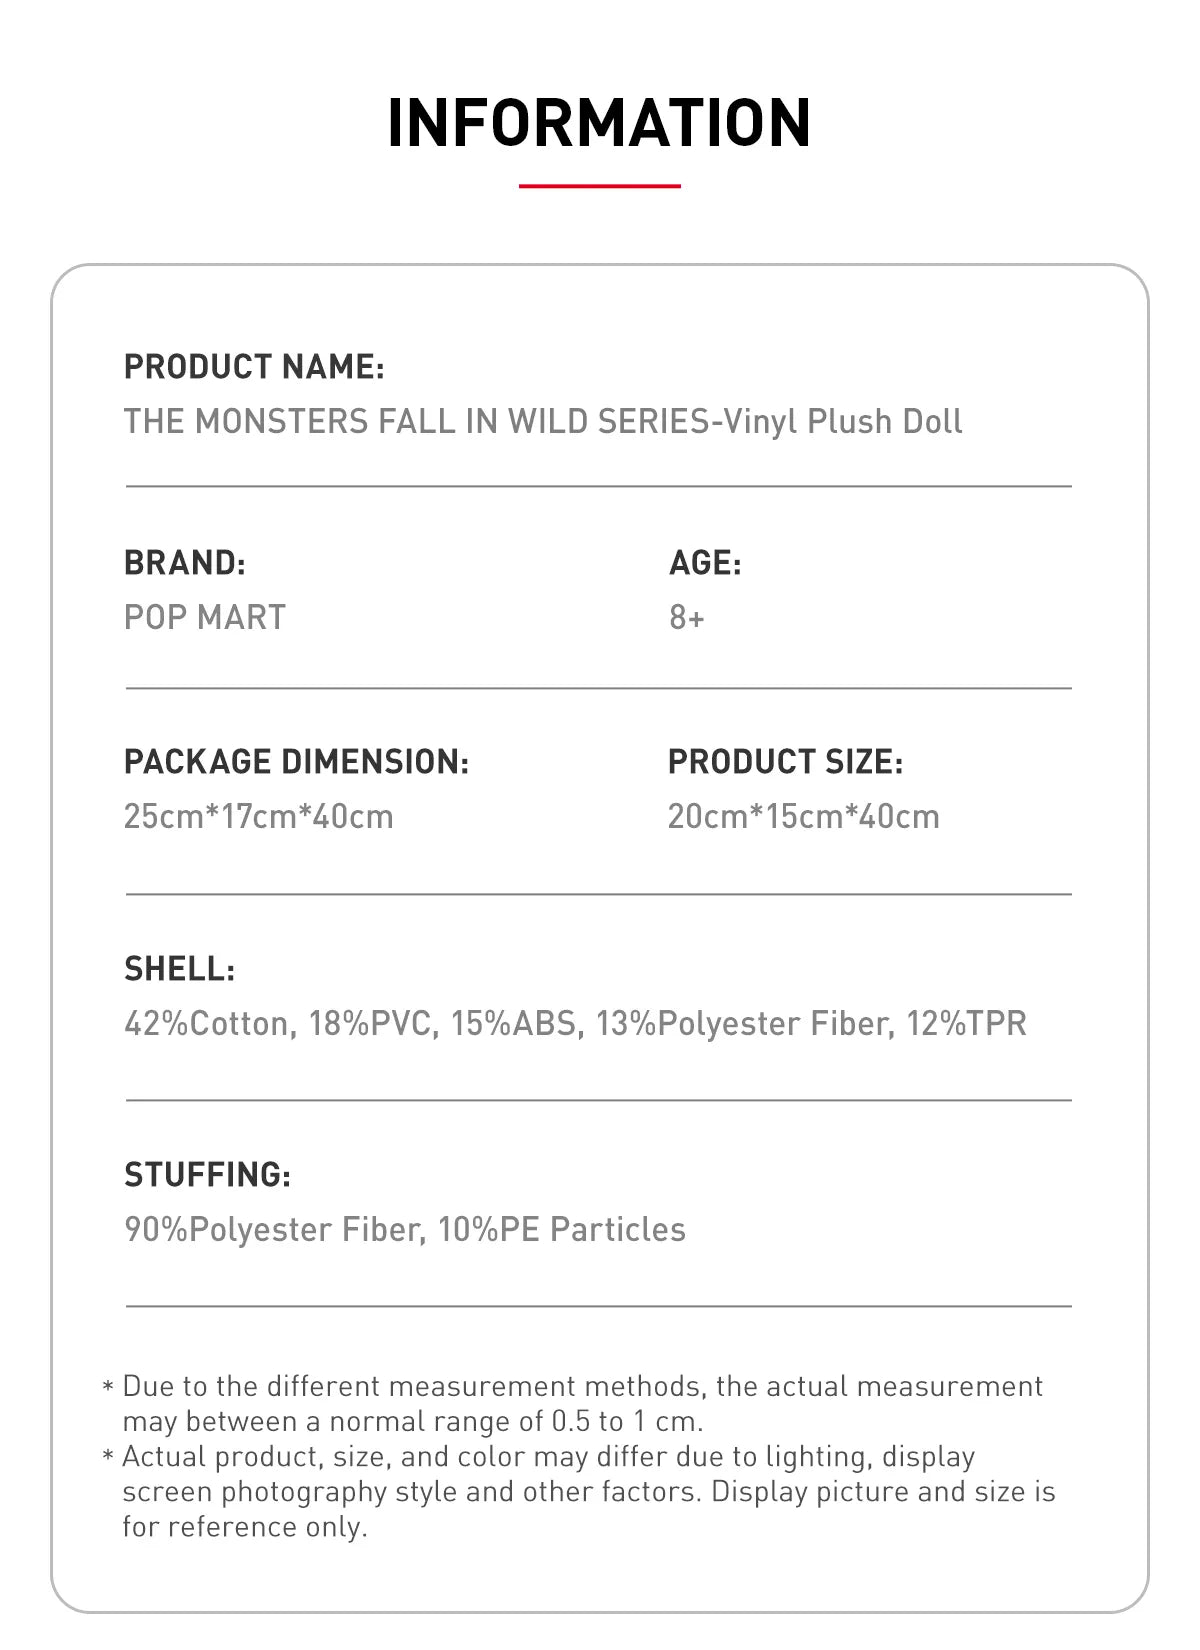 THE MONSTERS FALL IN WILD SERIES-Vinyl Plush Doll (40cm)